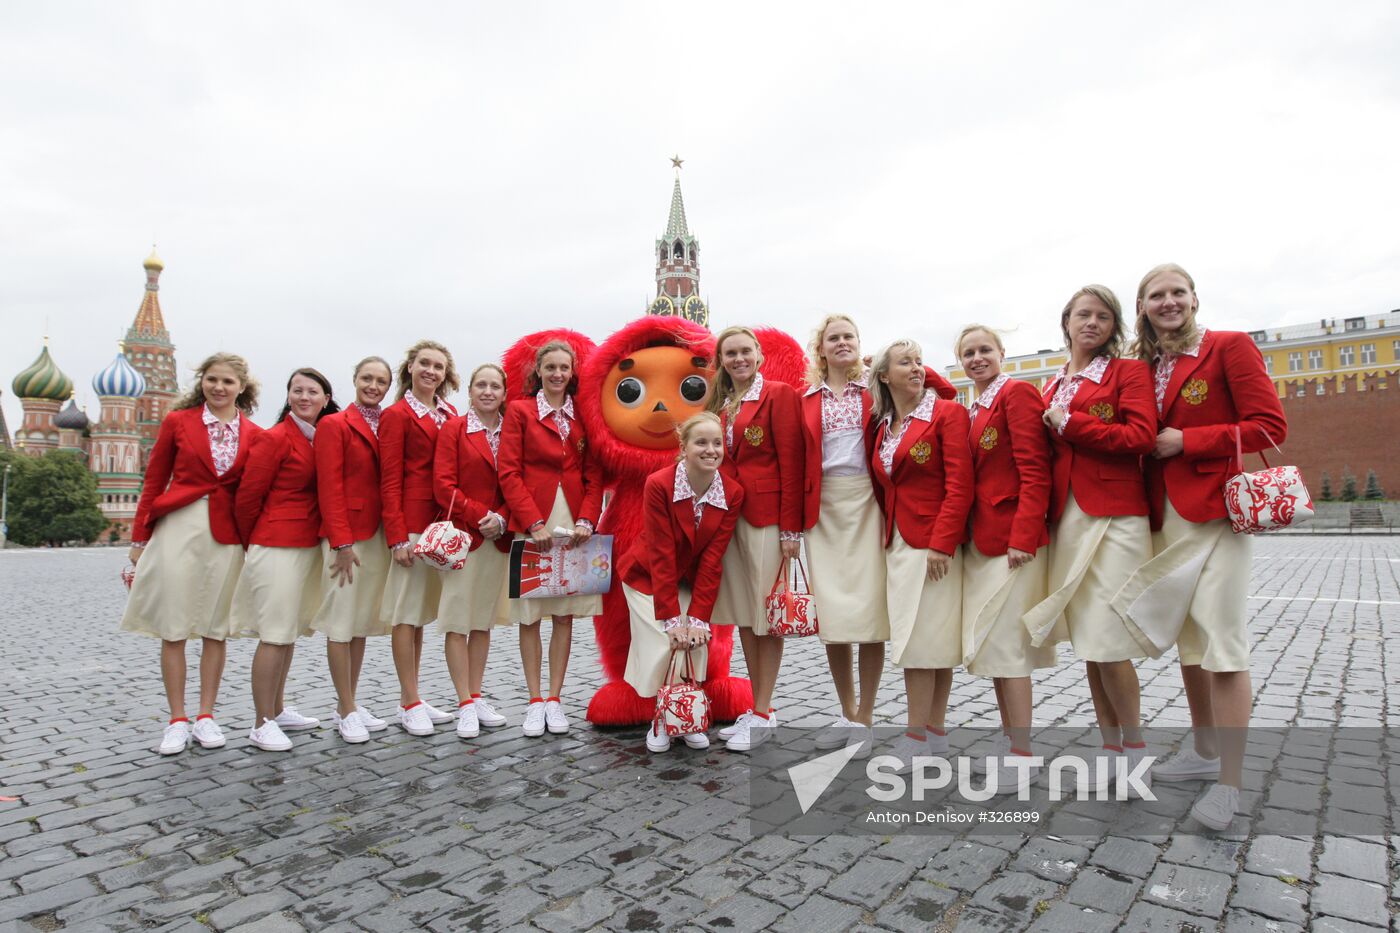 Farewell ceremony for Russian athletes going to Beijing